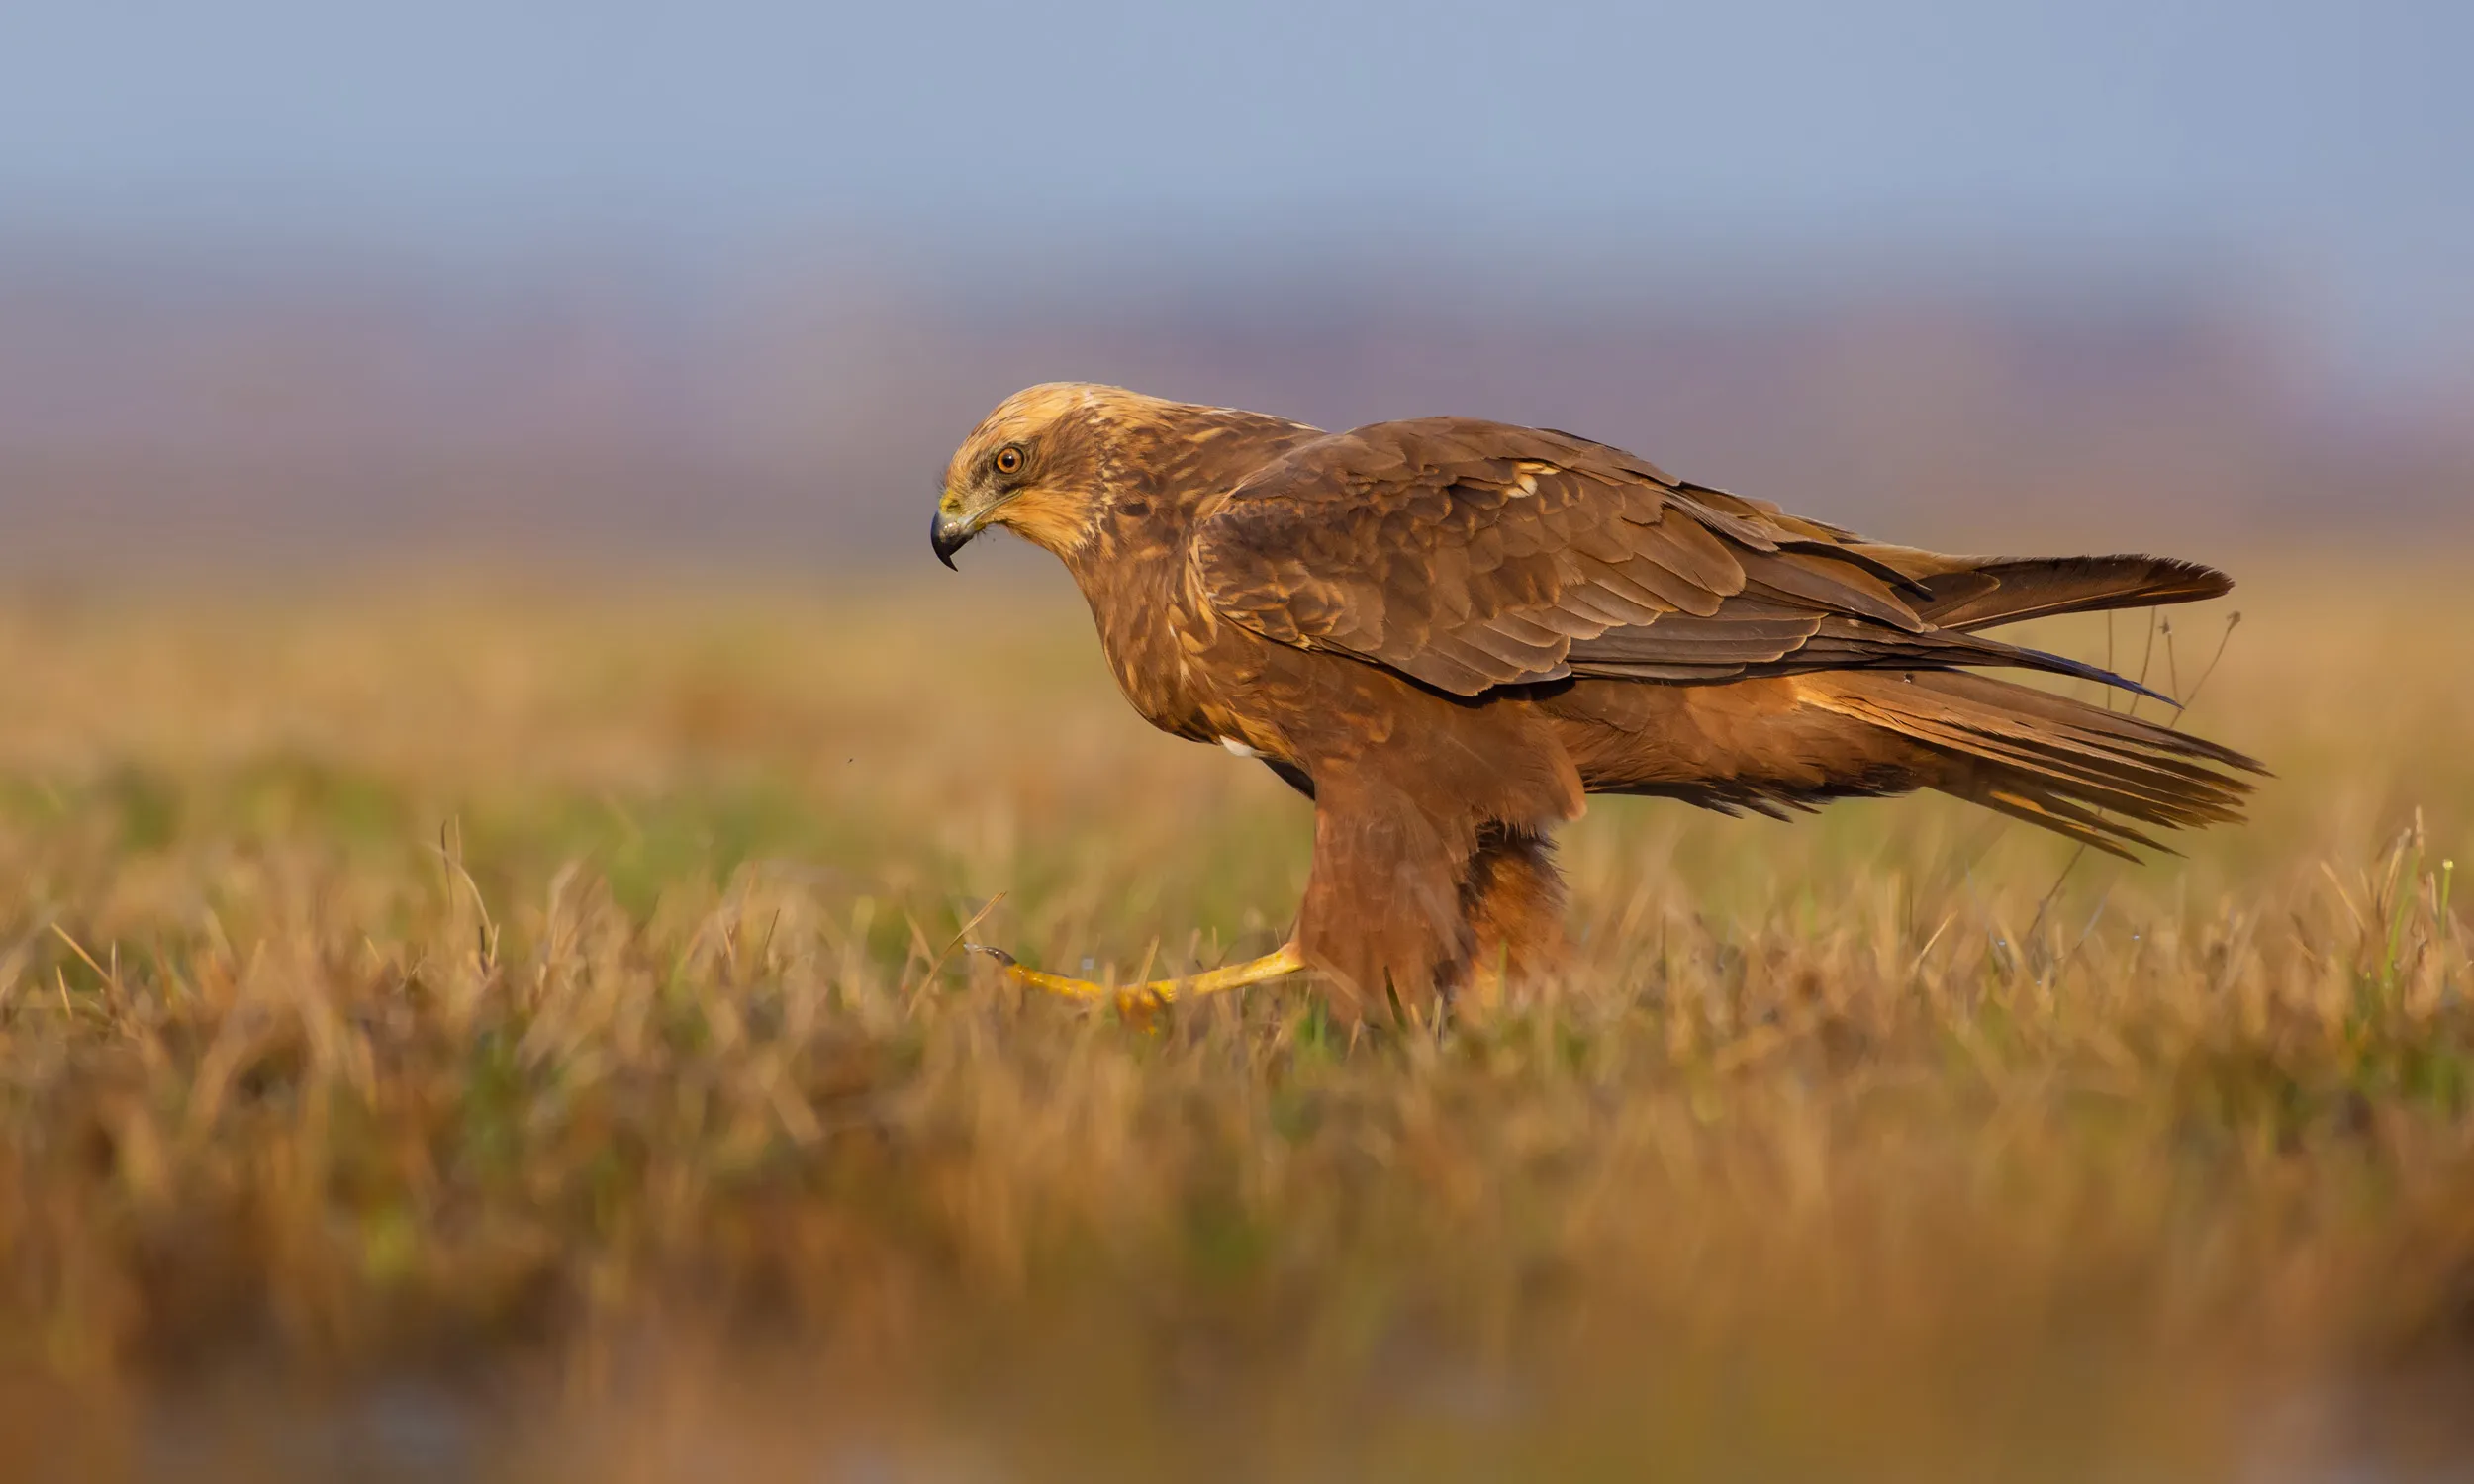 Large bird with brown plumage and a hooked beak, walking along a patch of short grass.